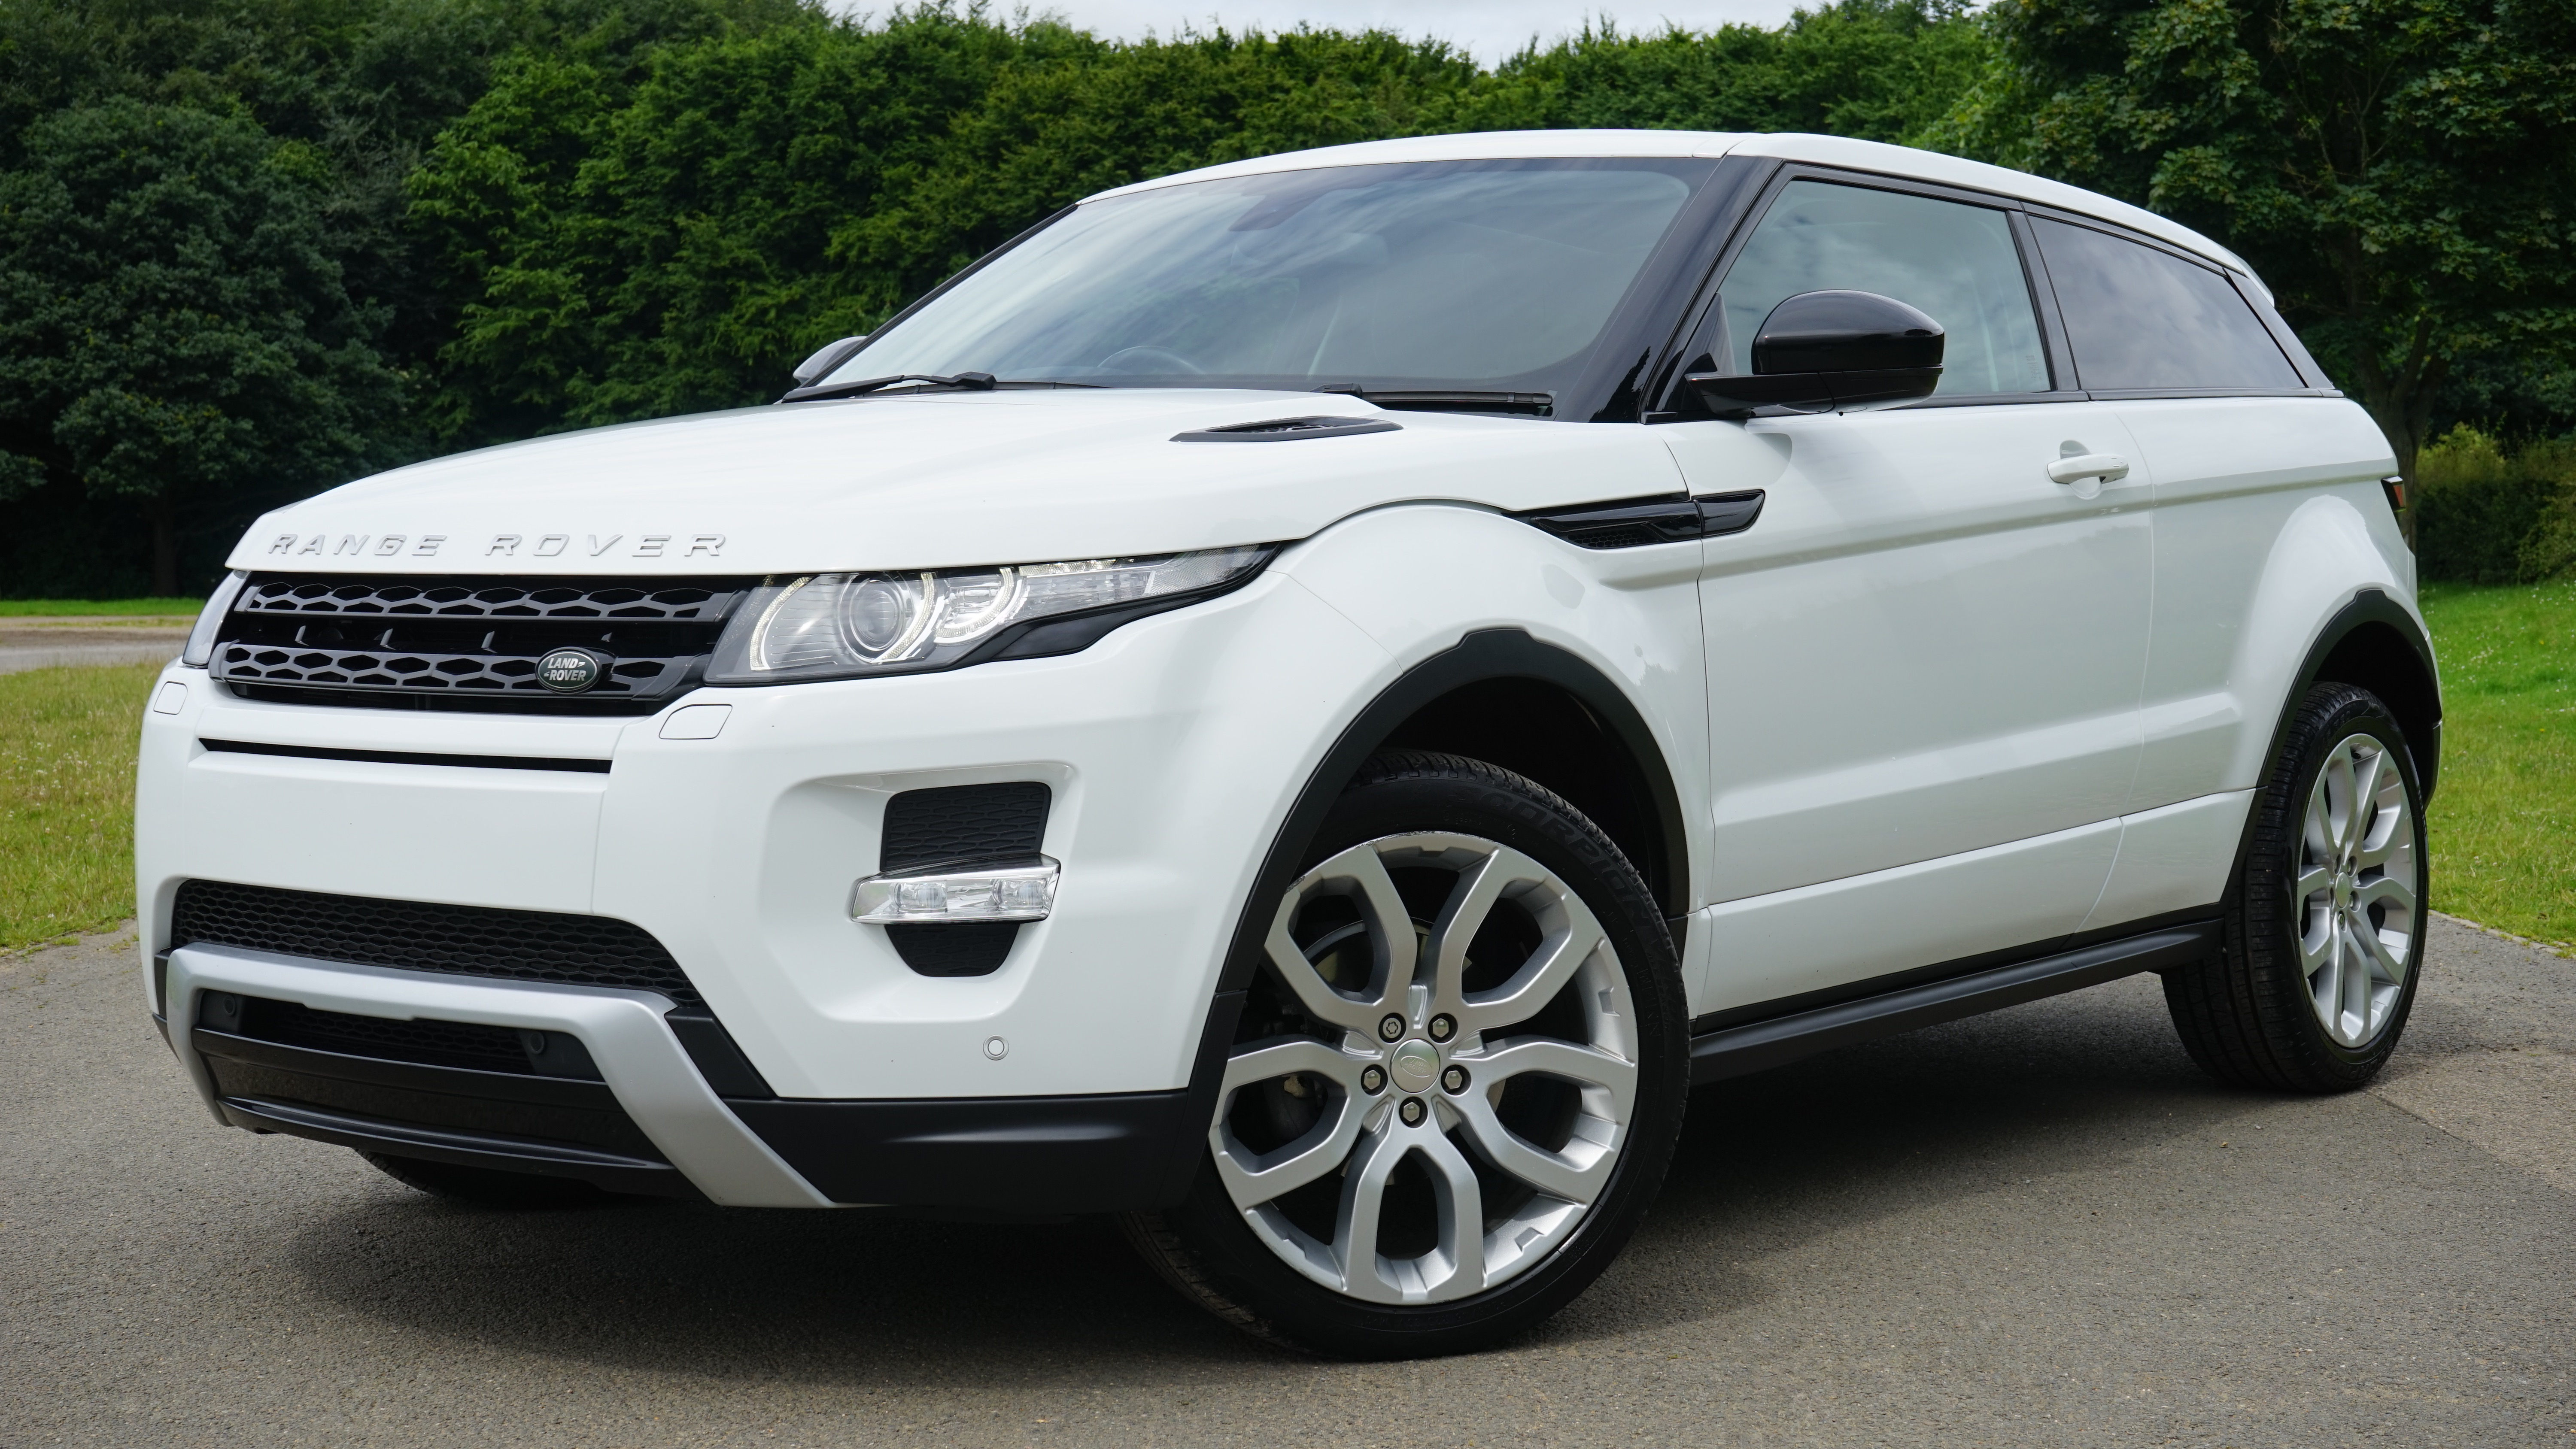 Main image for post: Matt Kay’s Car of the Month… The Range Rover Evoque